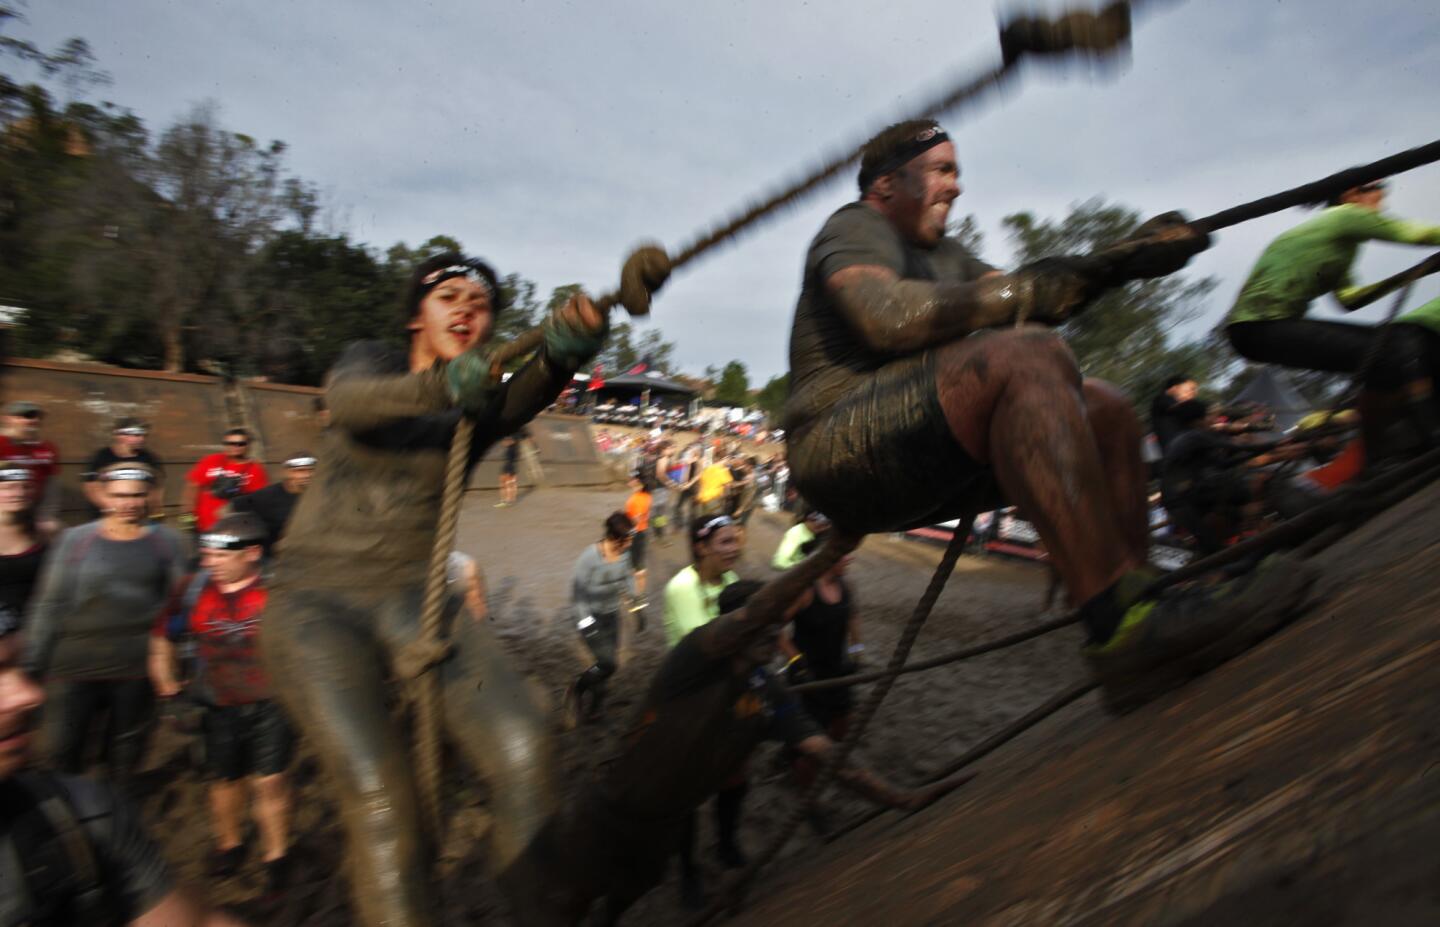 Participants use ropes to climb up the "slip wall" obstacle during the Reebok Spartan Race at Calamigos Ranch in Malibu on Dec. 7, 2014.